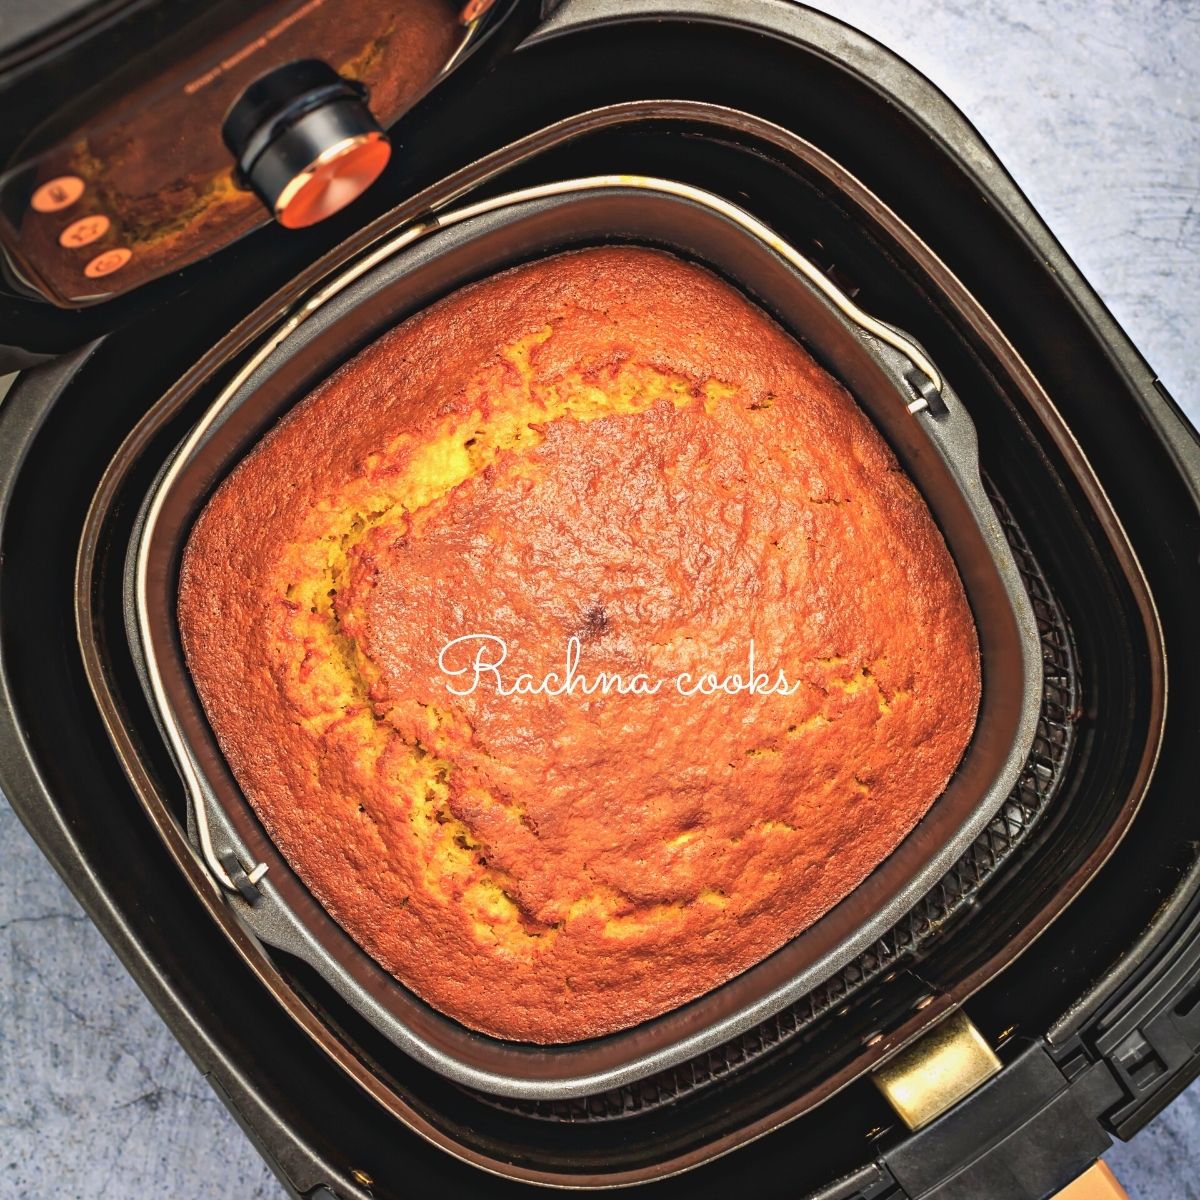 A metal baking container with cake inside an air fryer basket.